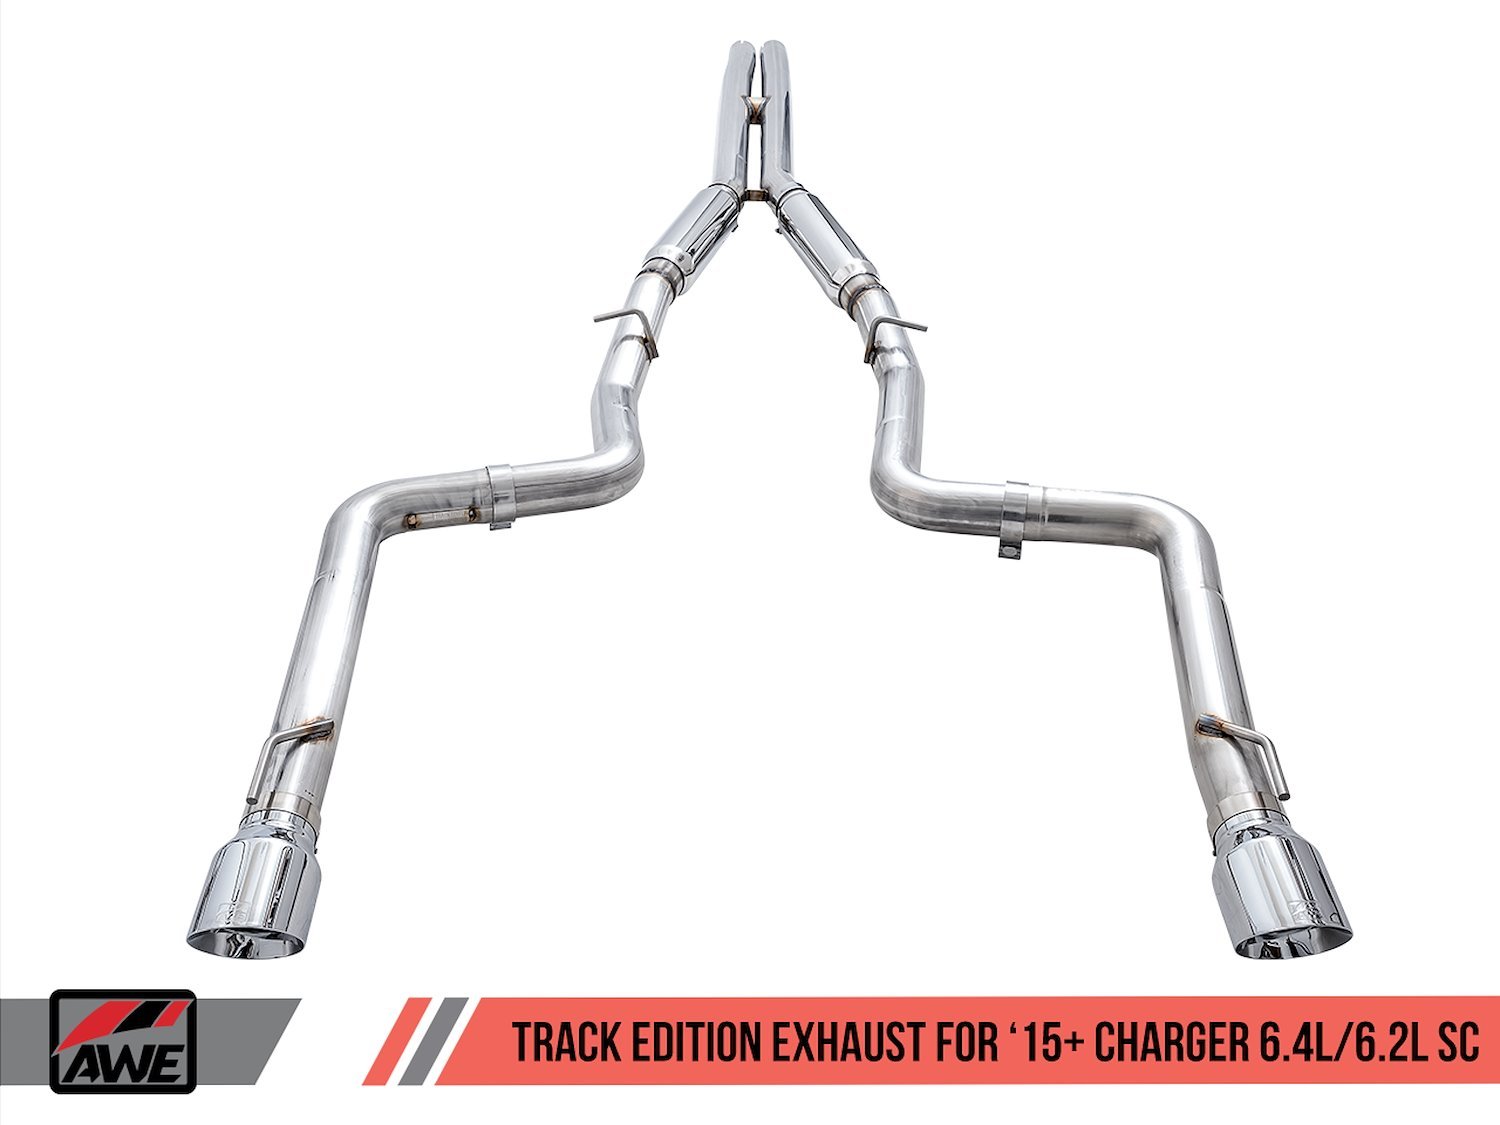 AWE Track Edition Exhaust for 15+ Charger 6.4 / 6.2 SC - Chrome Silver Tips